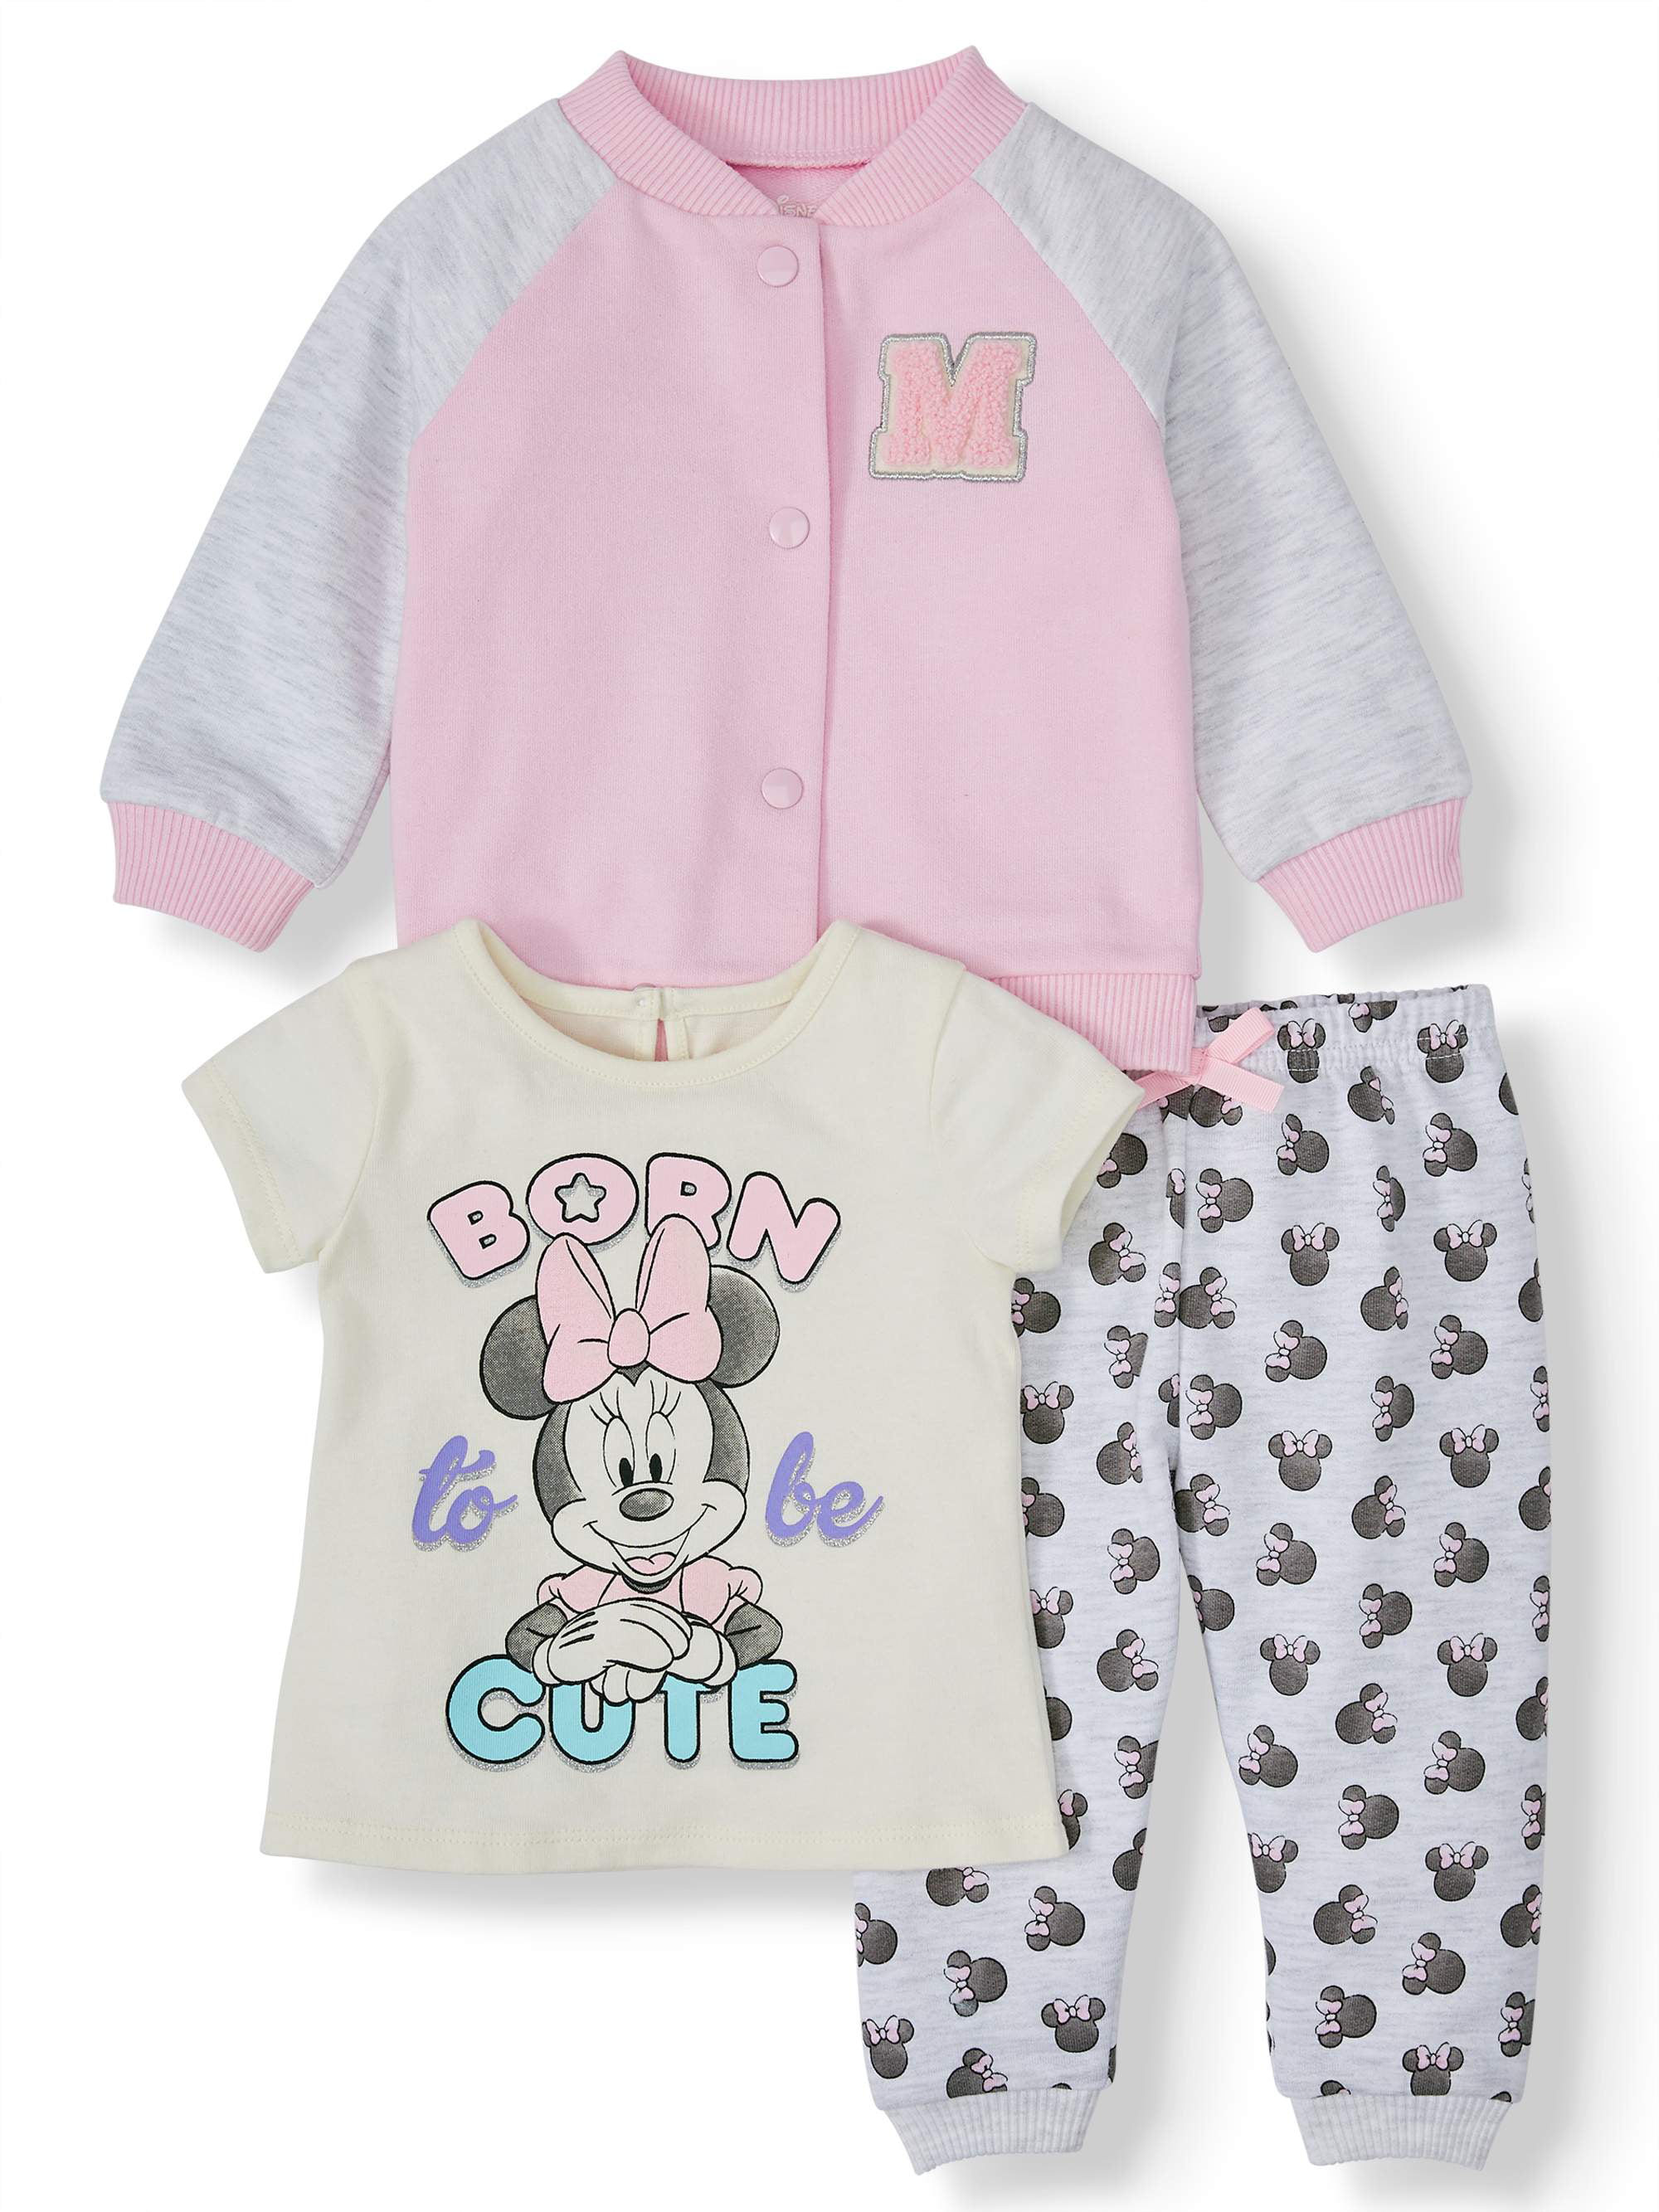 Details about   Minnie Mouse Baby Girls Varsity Jacket Jersey Tee and Legging 3pc Set 